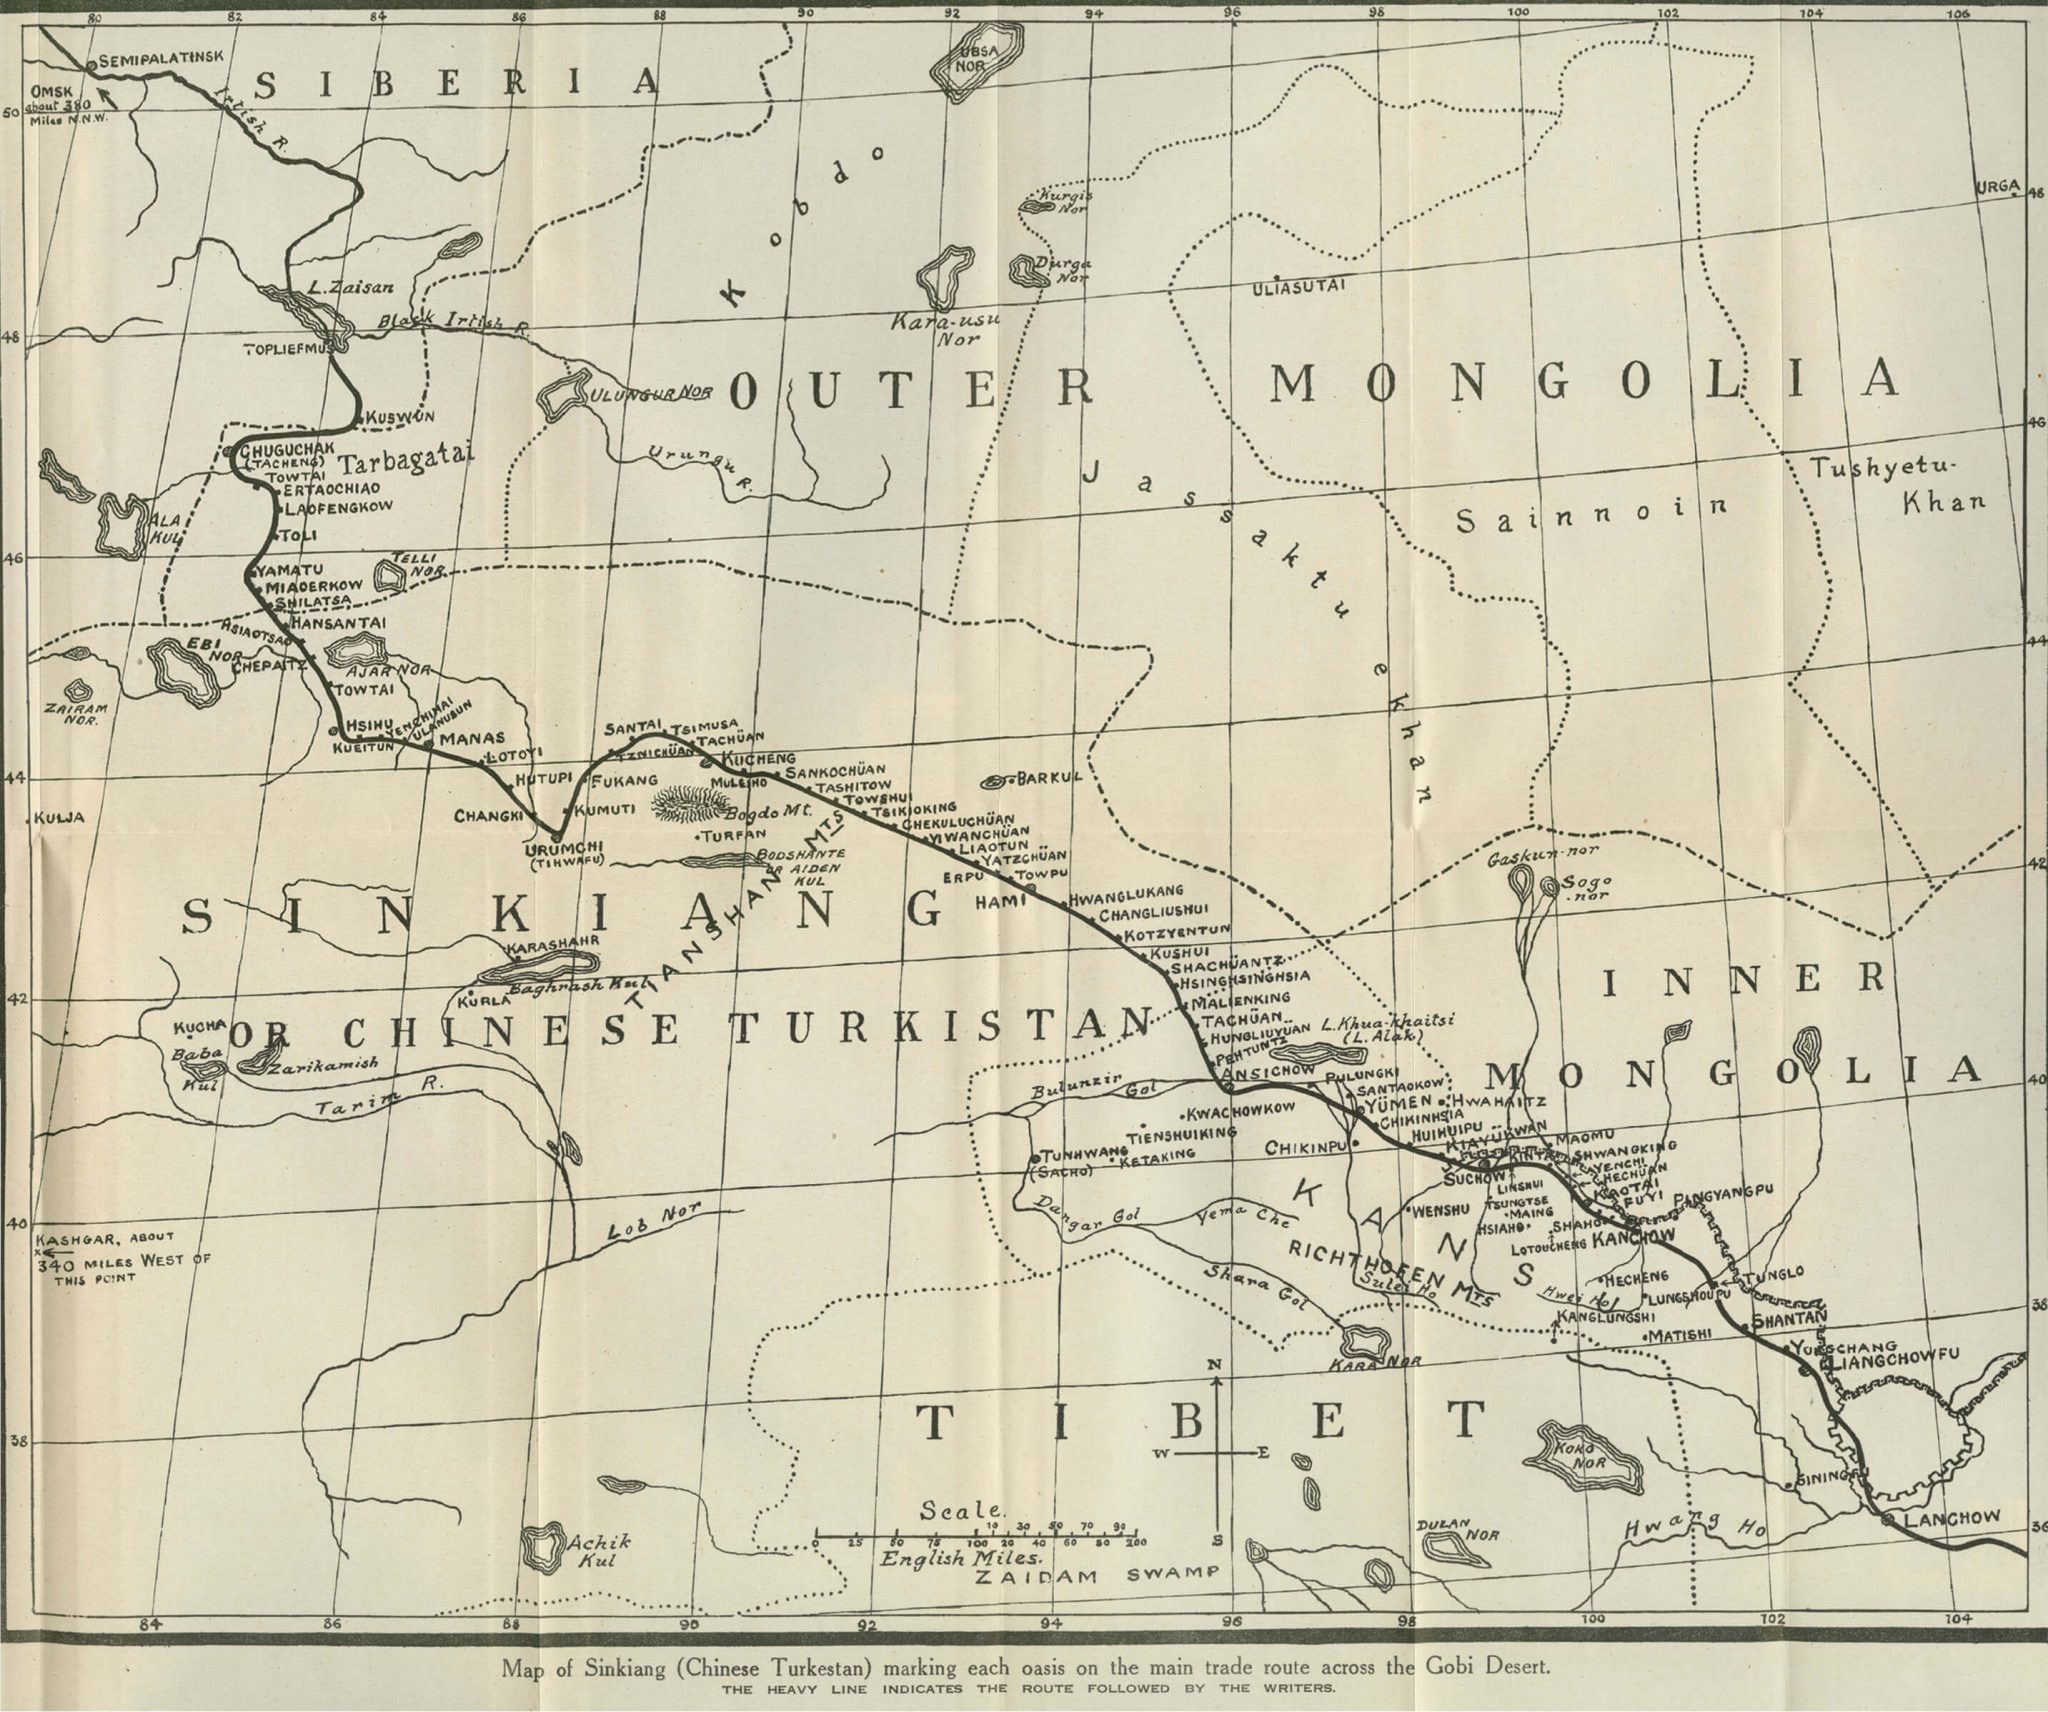 Map of Sinkiang Chinese Turkestan marking each oasis on the main trade route across the Gobi Desert 1927